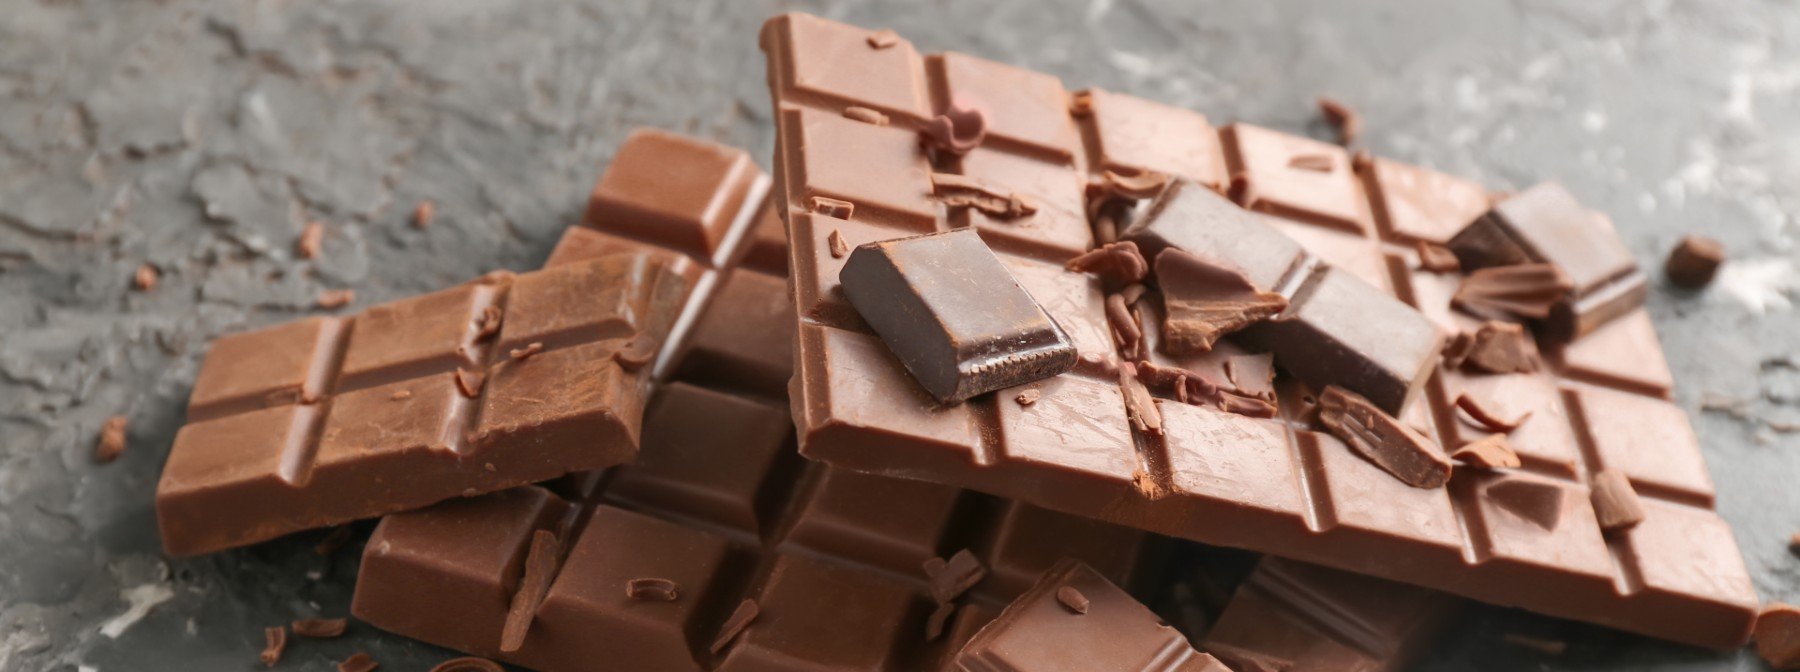 5 Simple Ways To Feel Healthier After Eating All Your Easter Chocolate